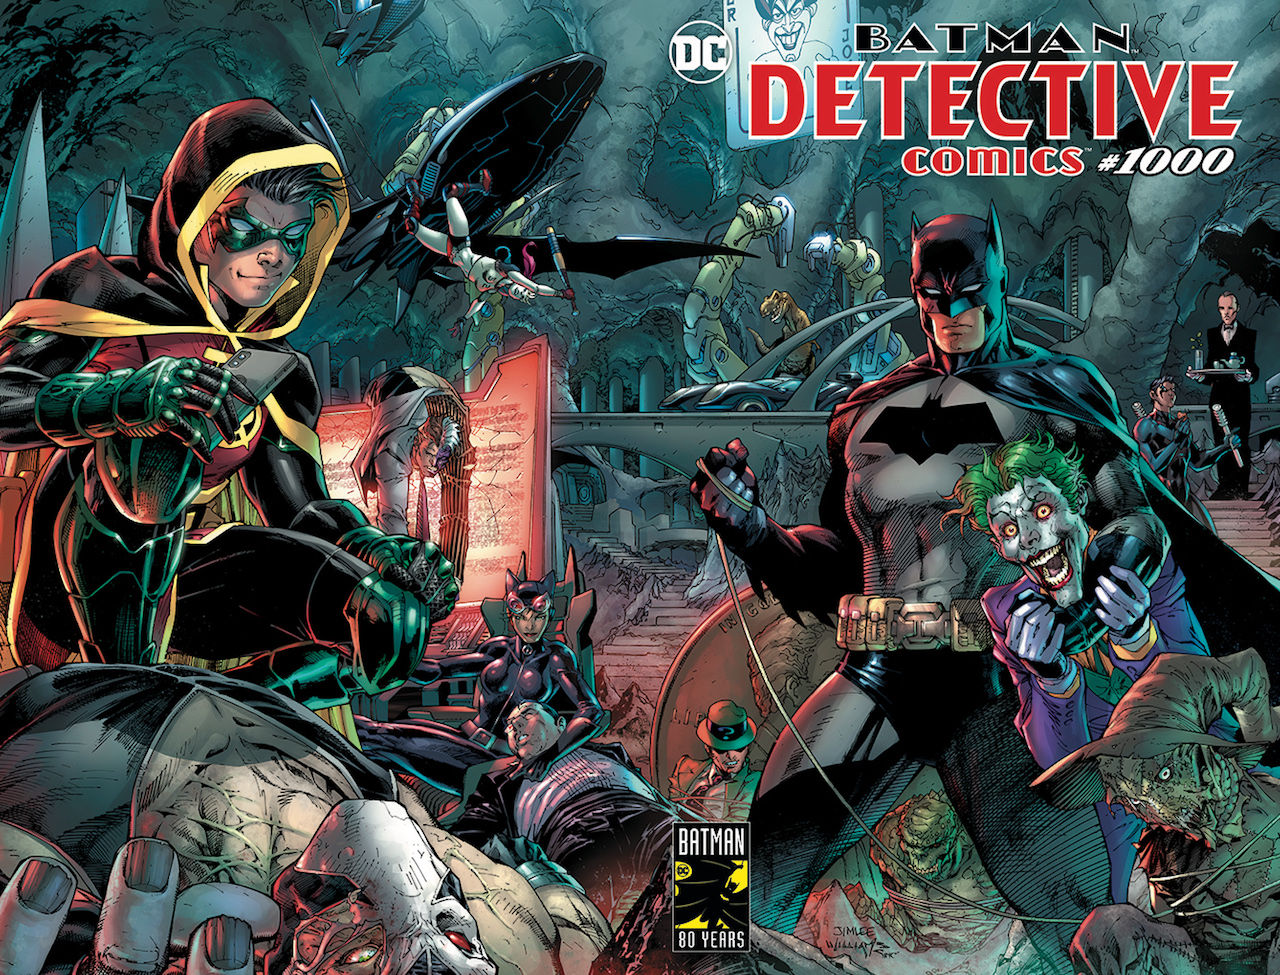 'Detective Comics' #1000 will feature 96 pages and star studded lineup of creators this March